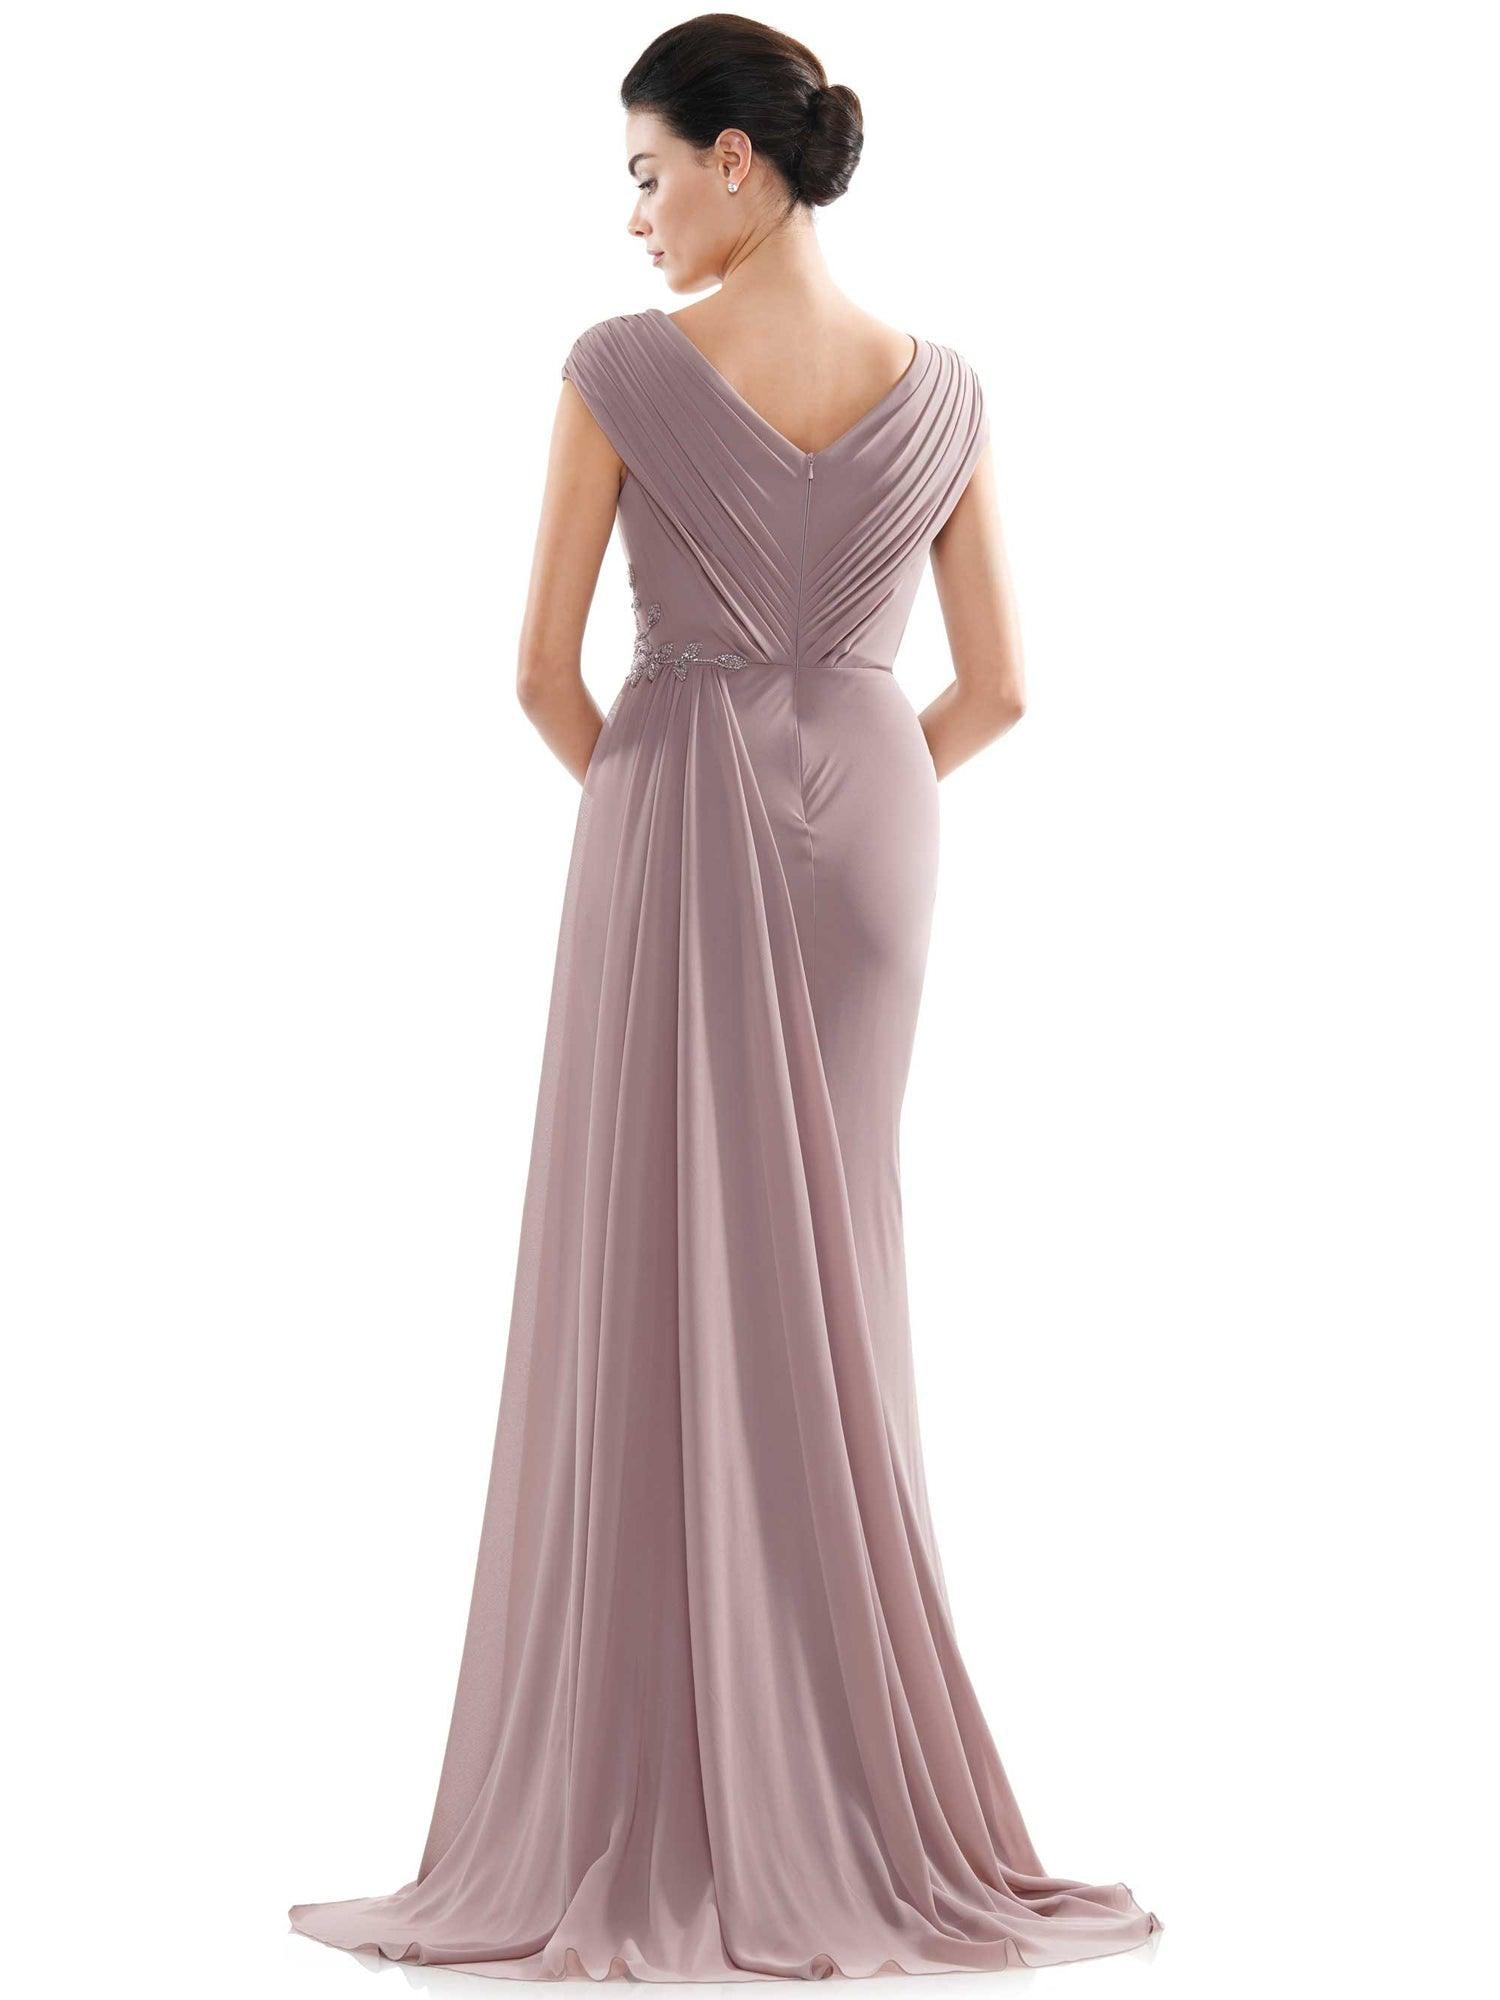 Marsoni Mother of the Bride Chiffon Long Gown 1080 - The Dress Outlet